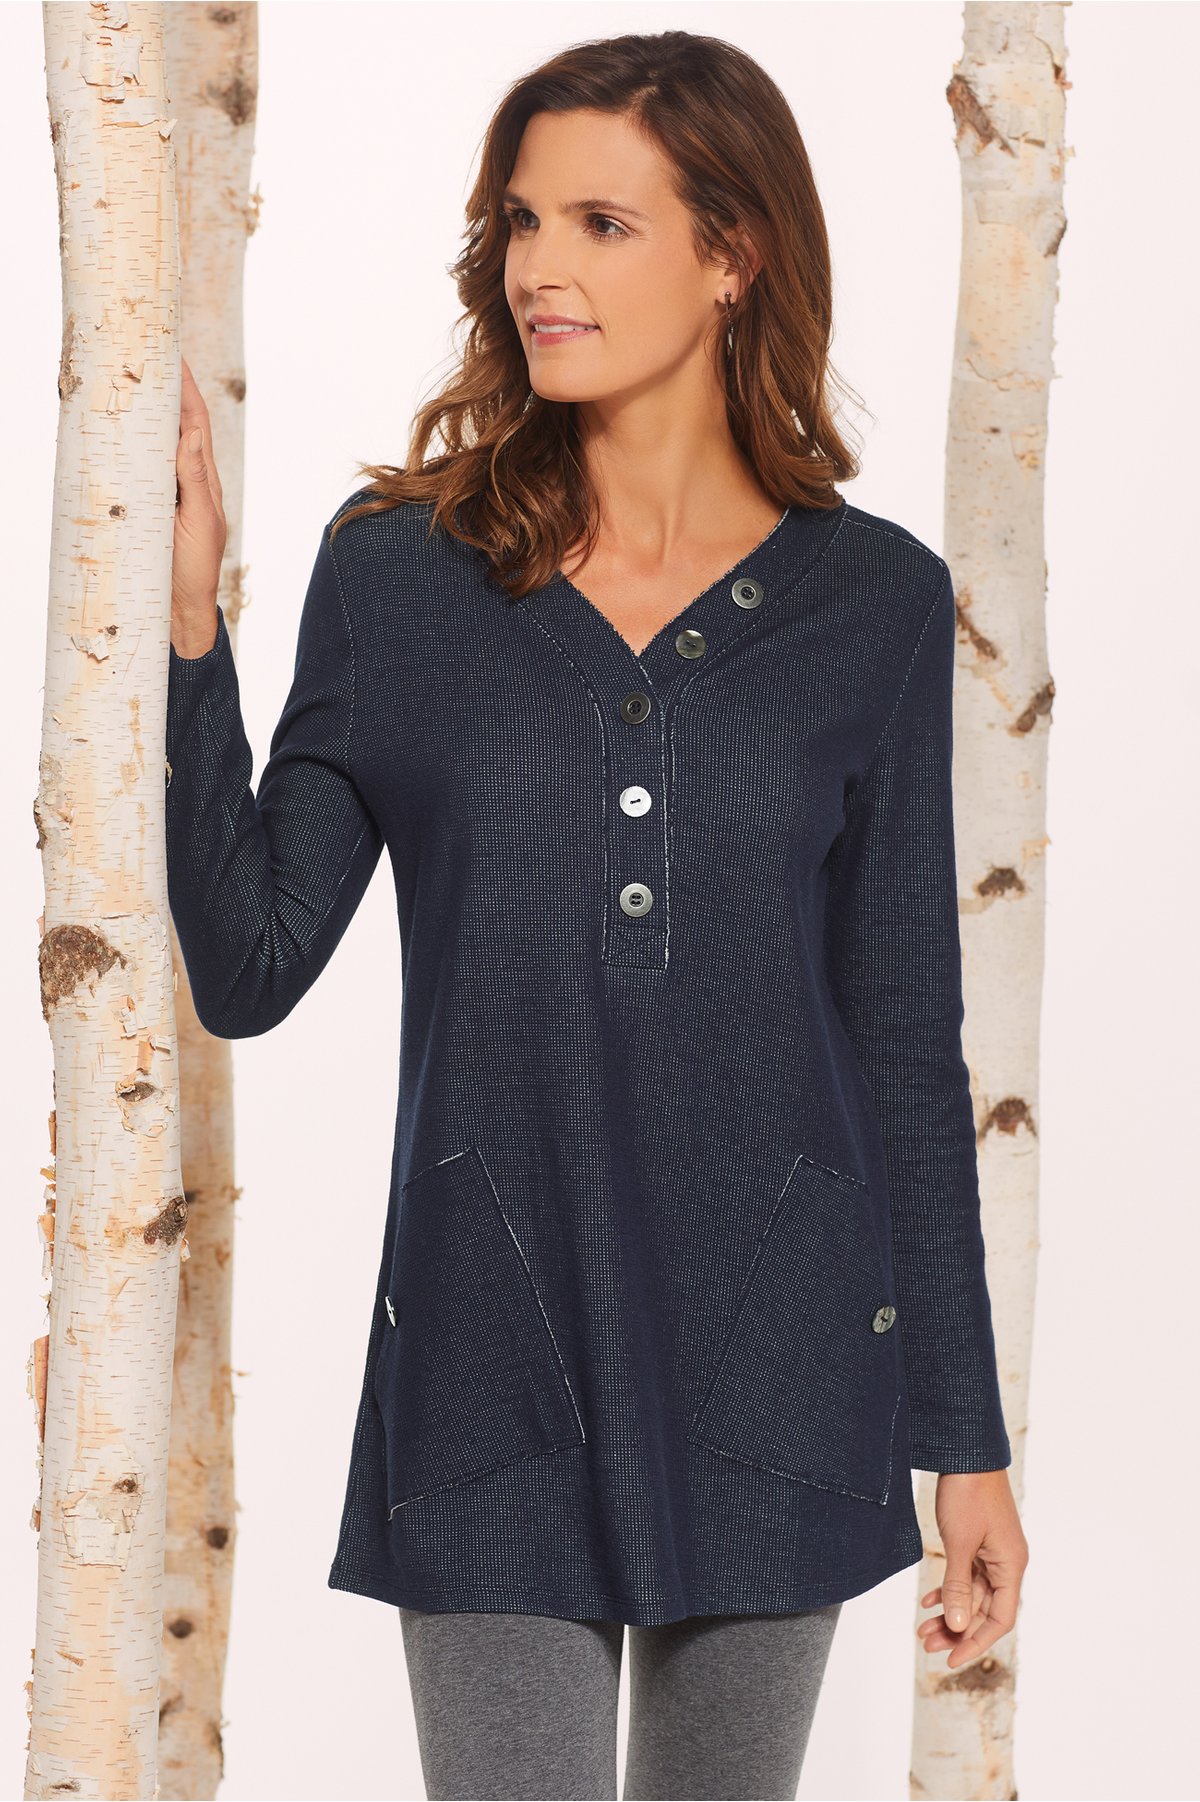 Petites Downtime Tunic Soft Surroundings Outlet